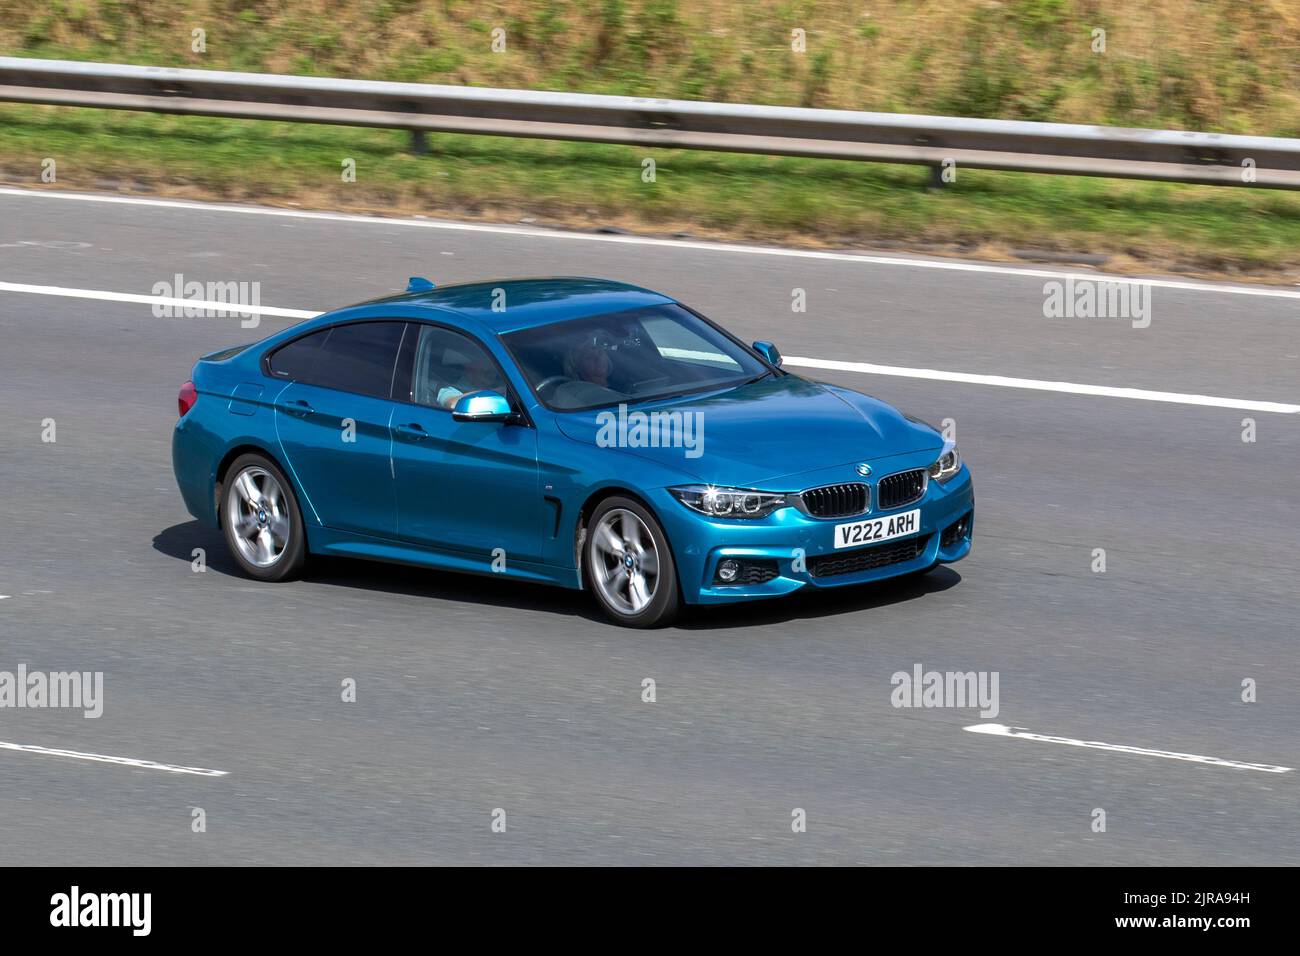 2018 Blue BMW 430i 330D M Sport Shadow Edition 2993cc 8-speed manual Diesel hatchback; travelling on the M6 Motorway UK Stock Photo